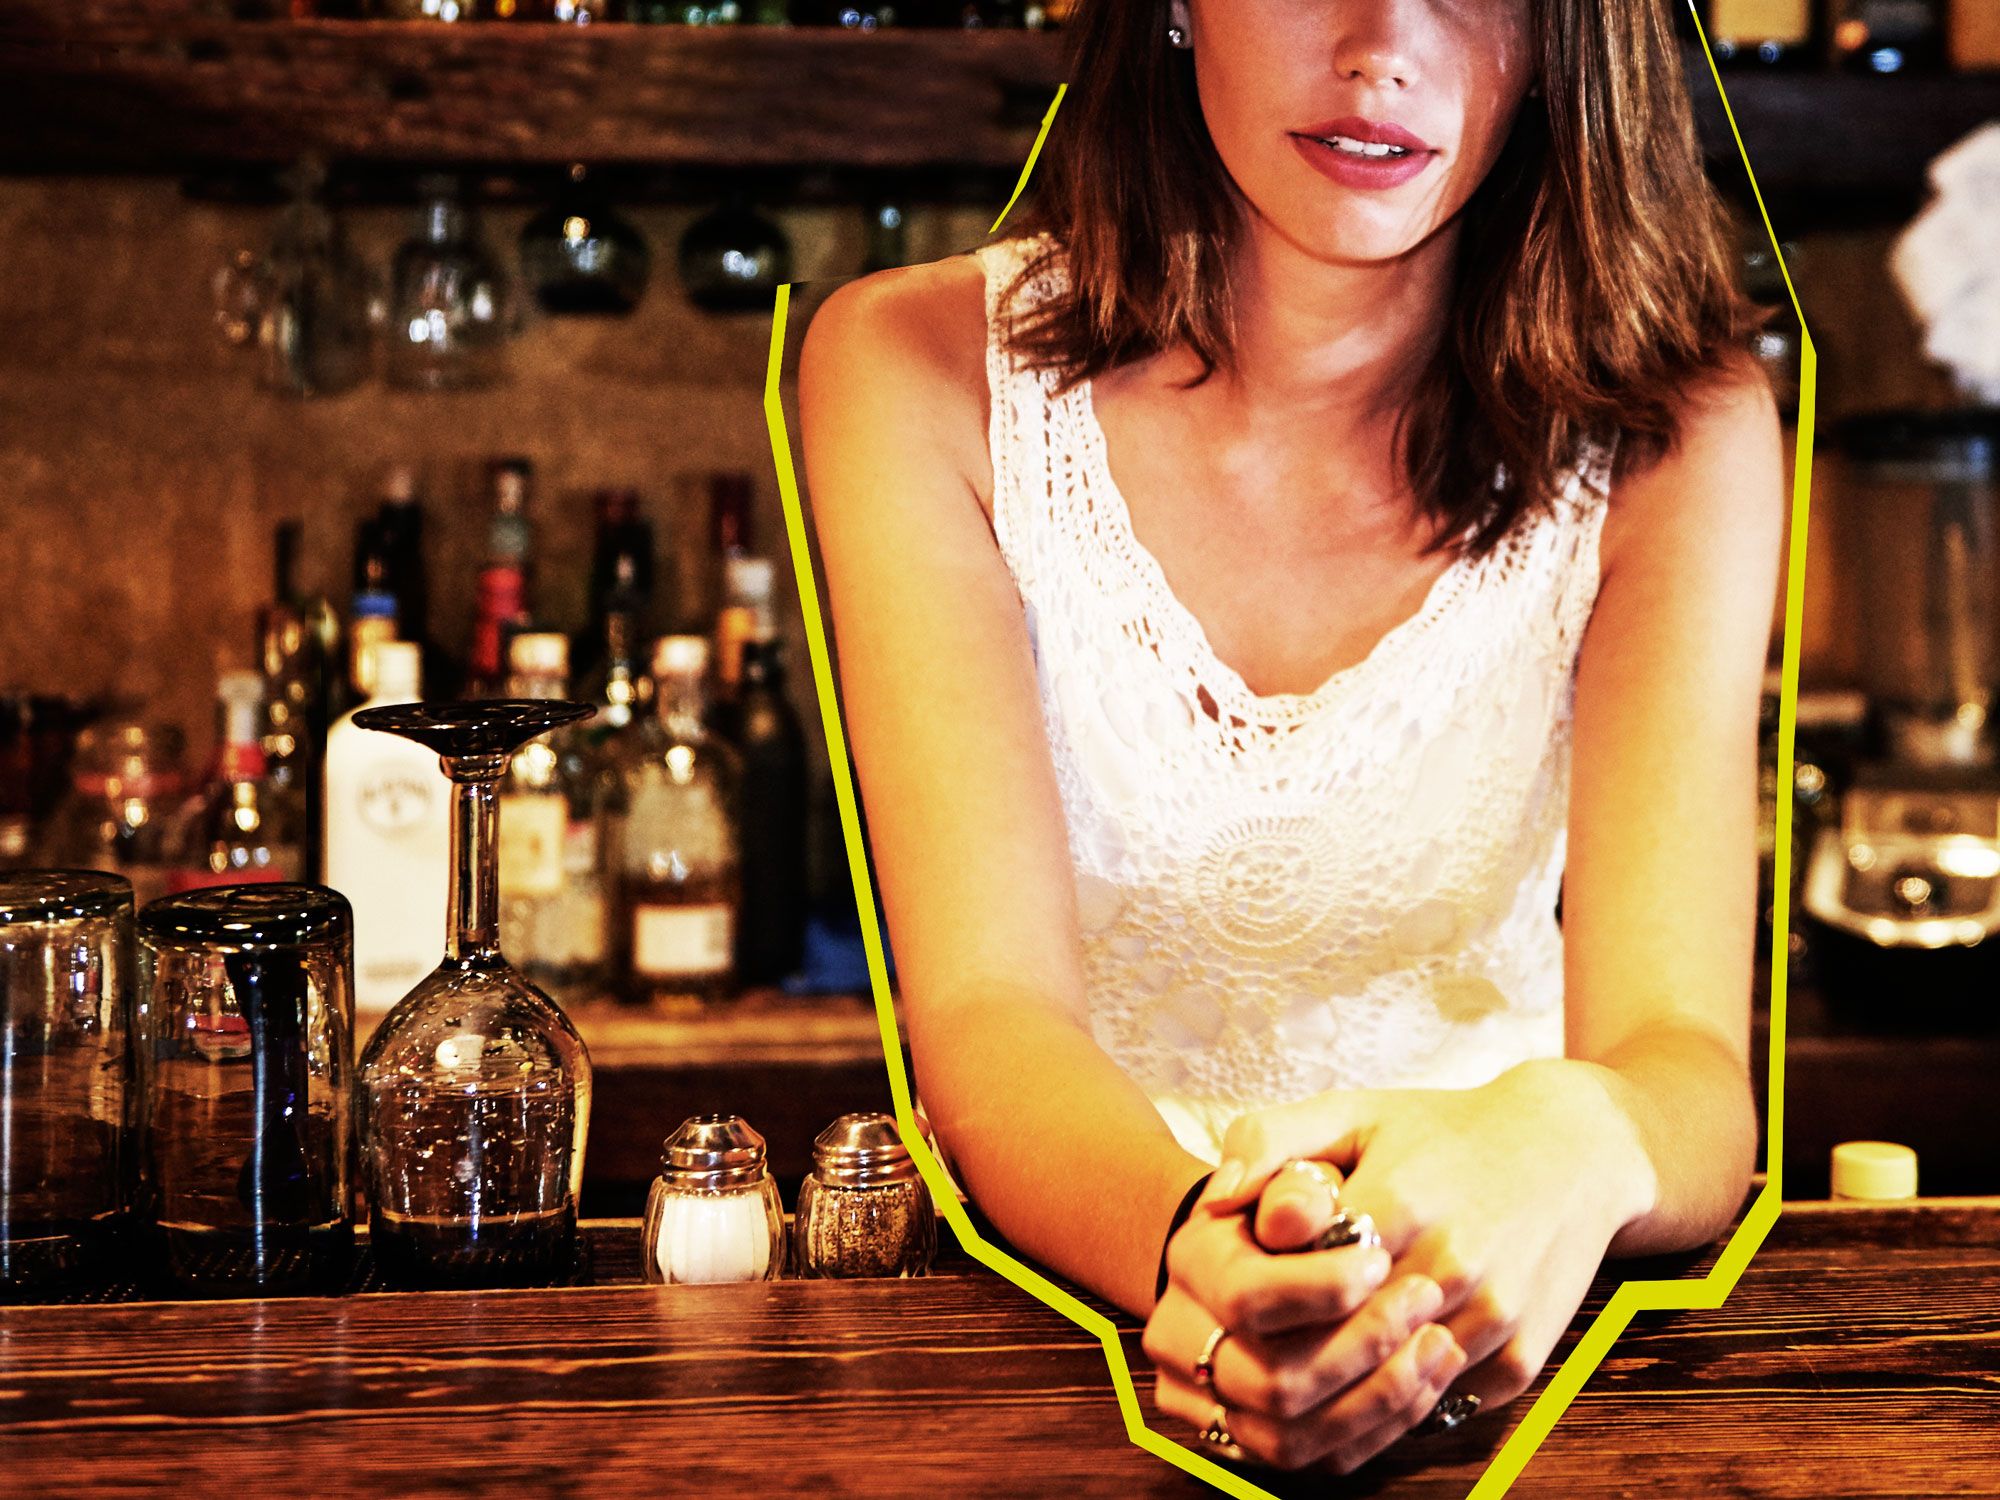 Female Bartenders Open Up About Being Sexually Harassed At Work